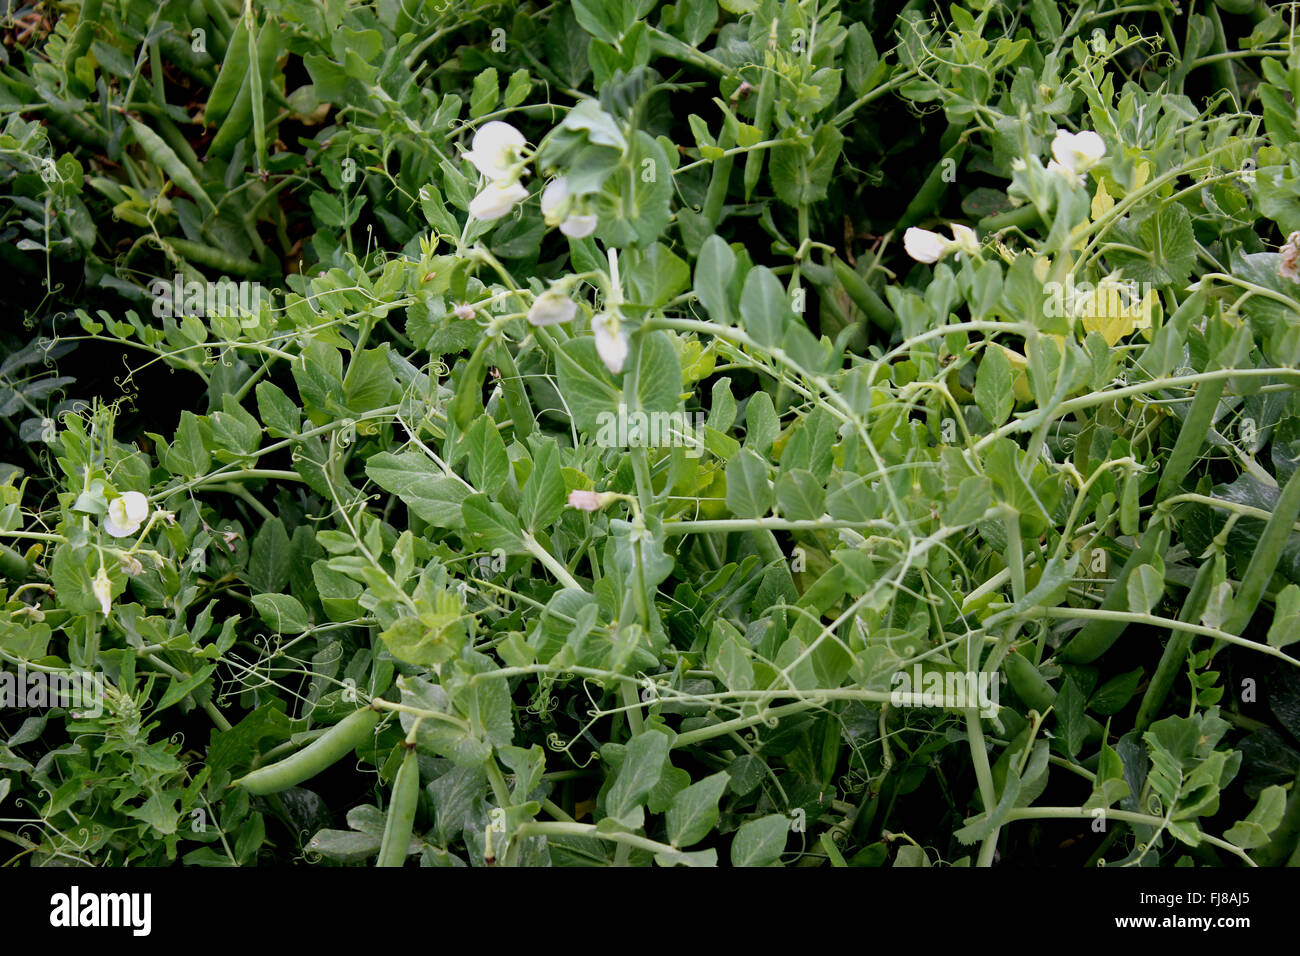 Garden Pea, Pisum sativum, herb with pinnate leaves with terminal tendrils for support, green pods with rounded seeds, vegetable Stock Photo